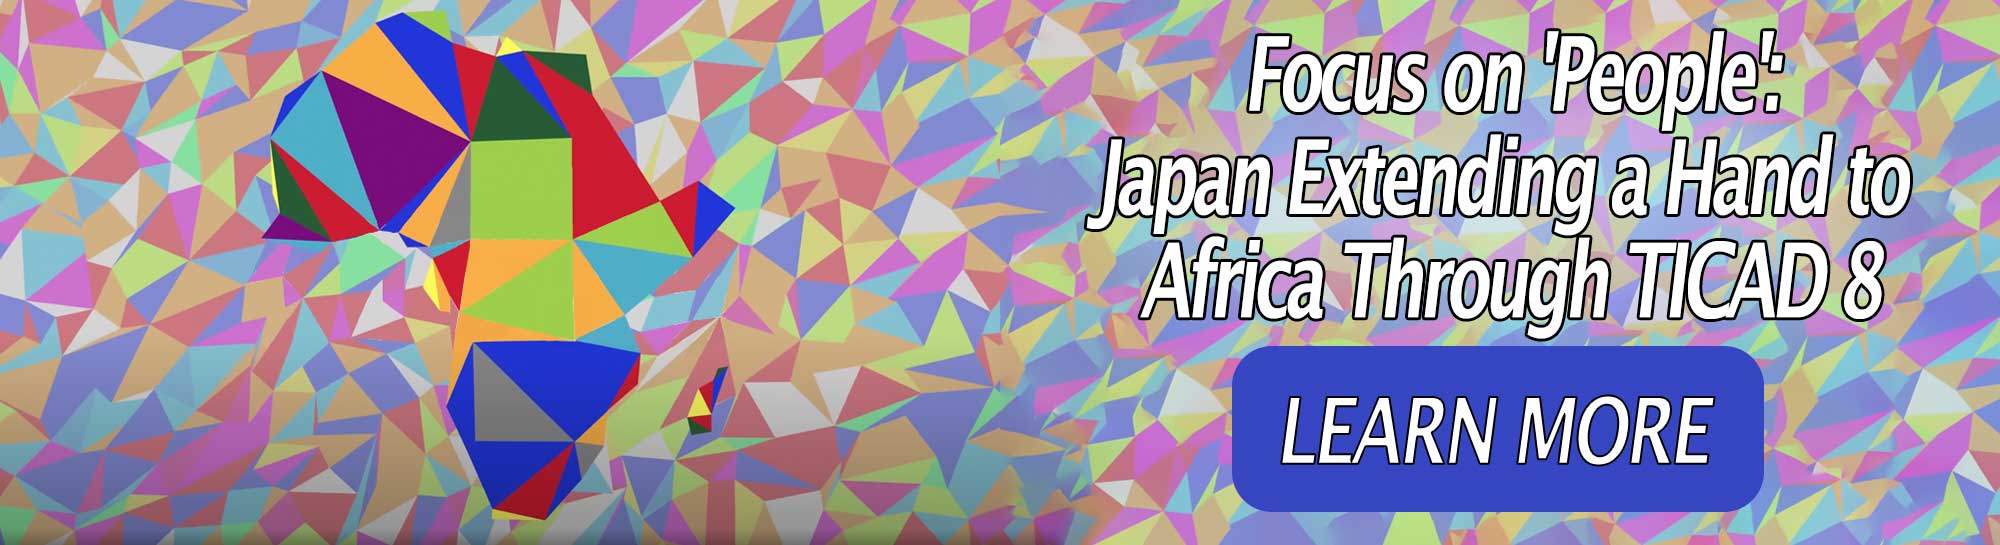 Focusing on 'People': Japan Reaching Out to Africa Through TICAD 8